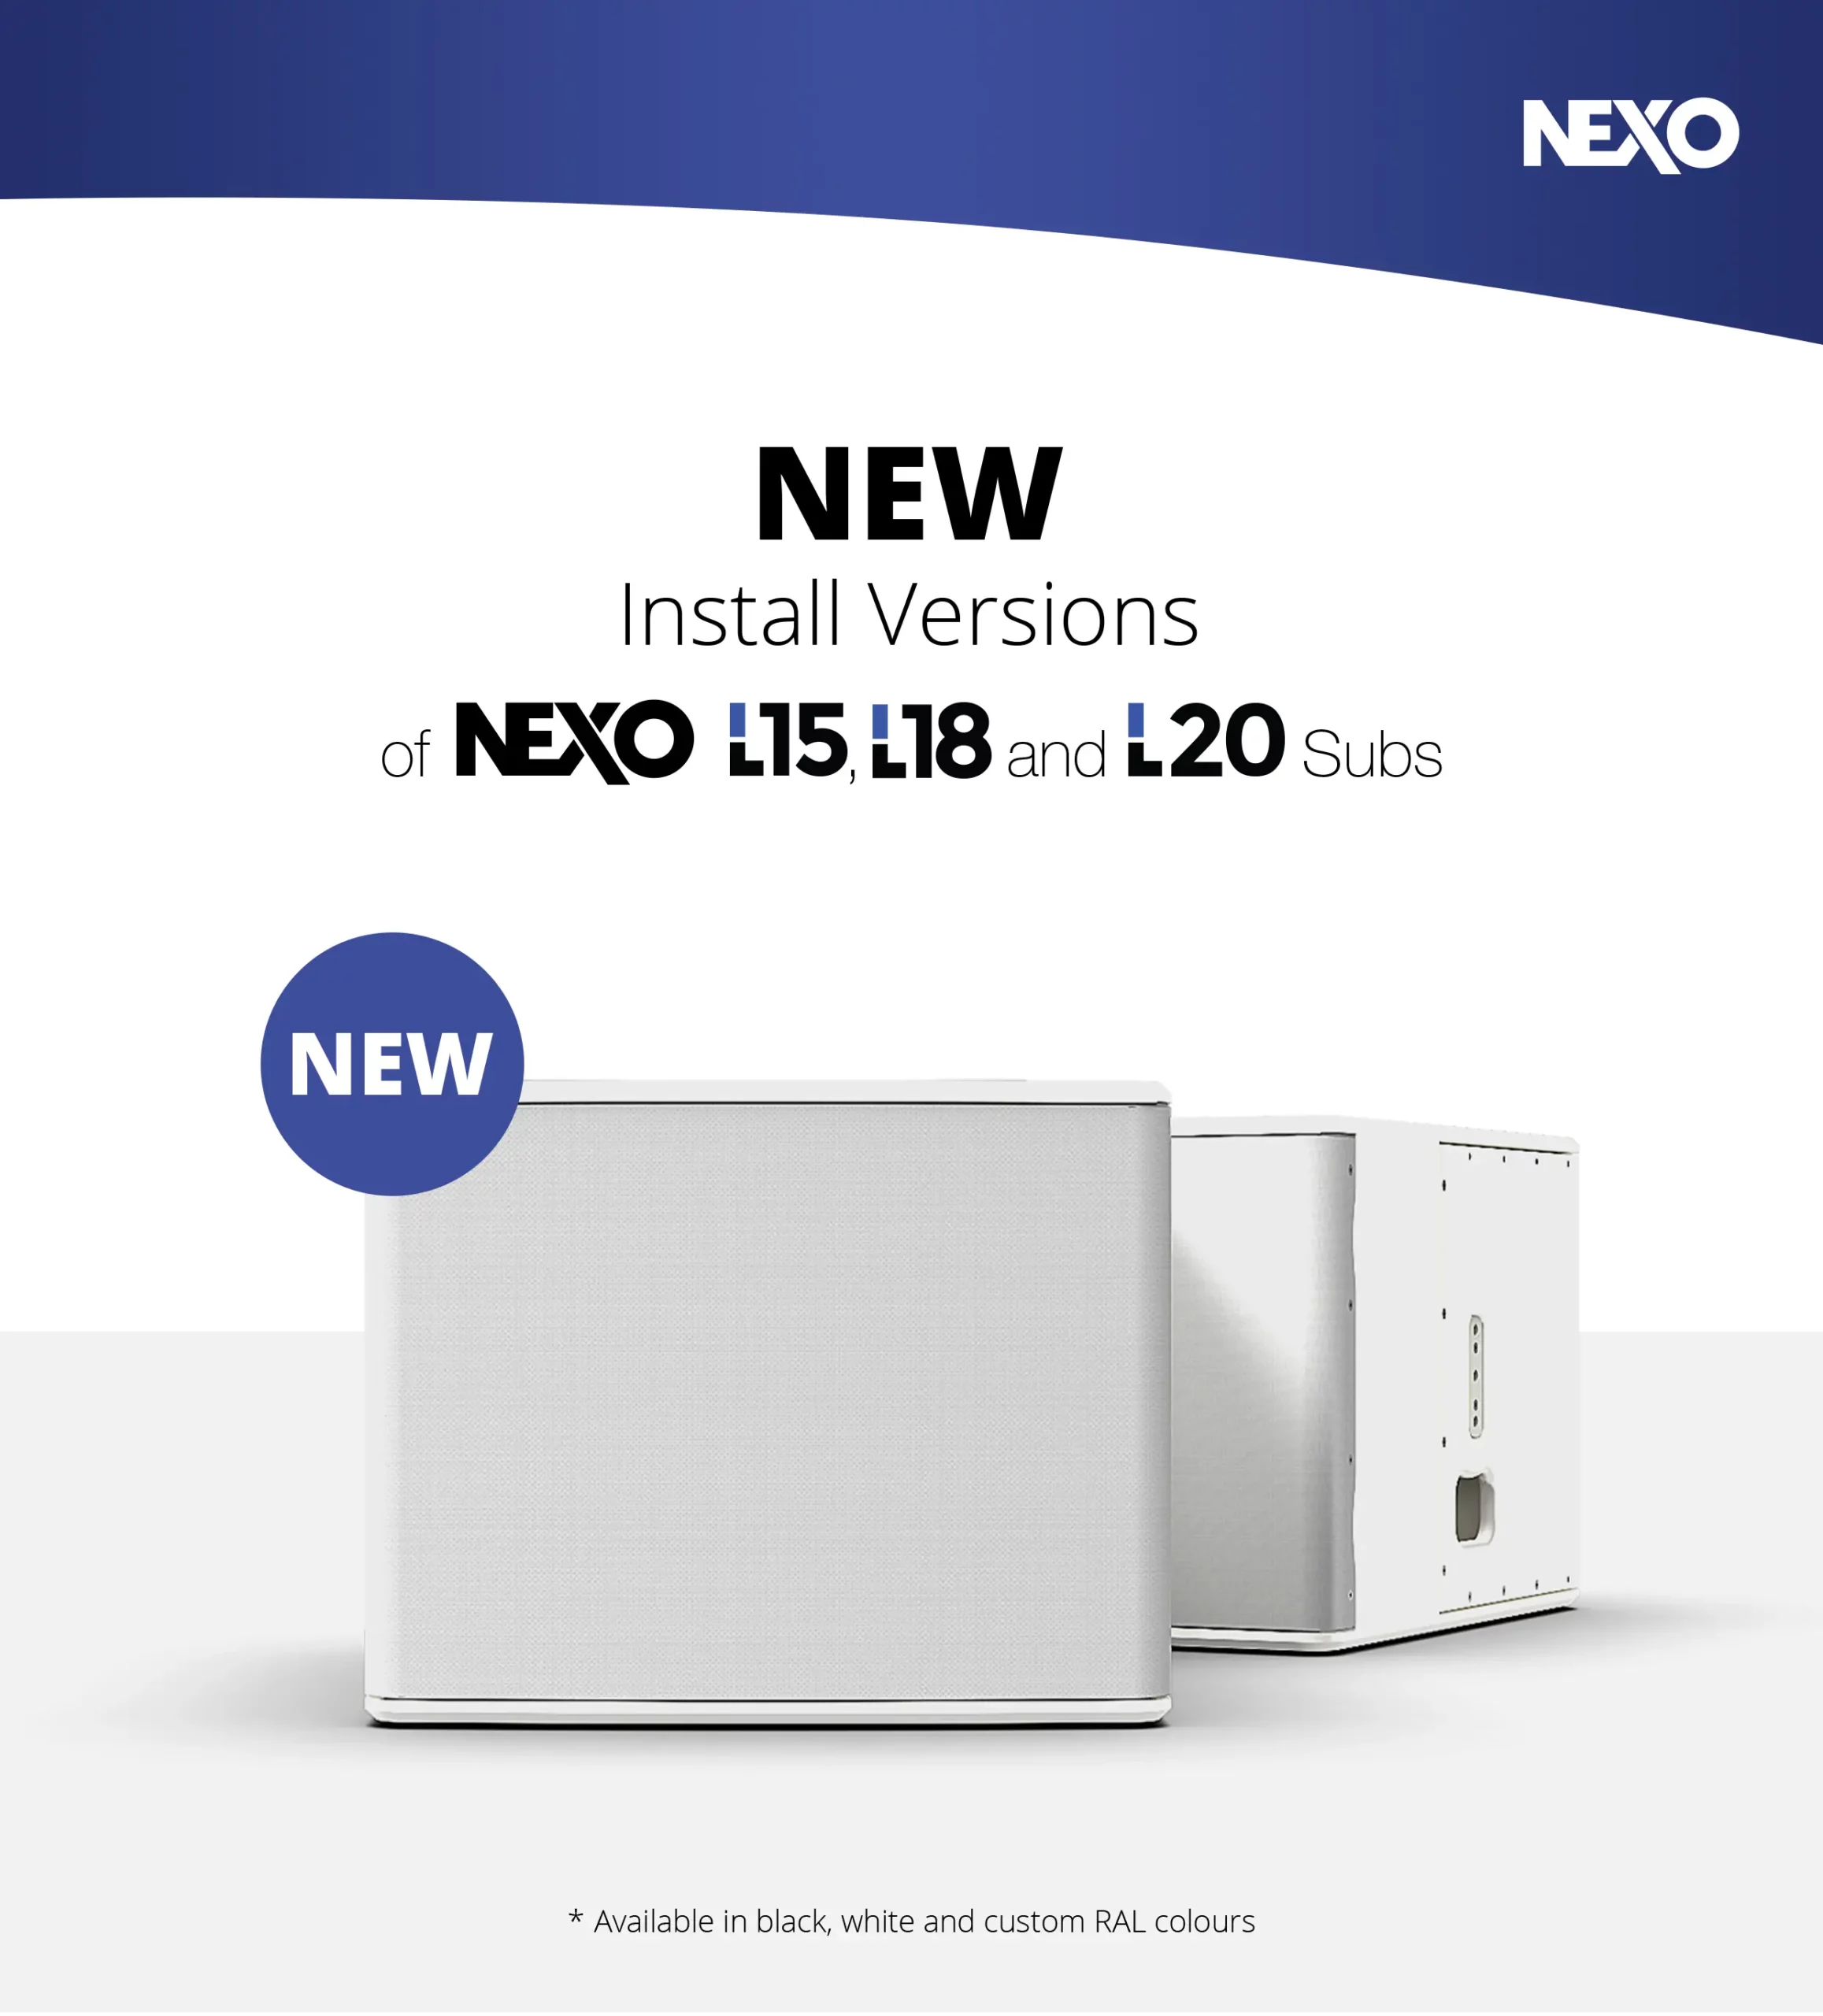 New Install Versions of NExo L15, L18 and L20